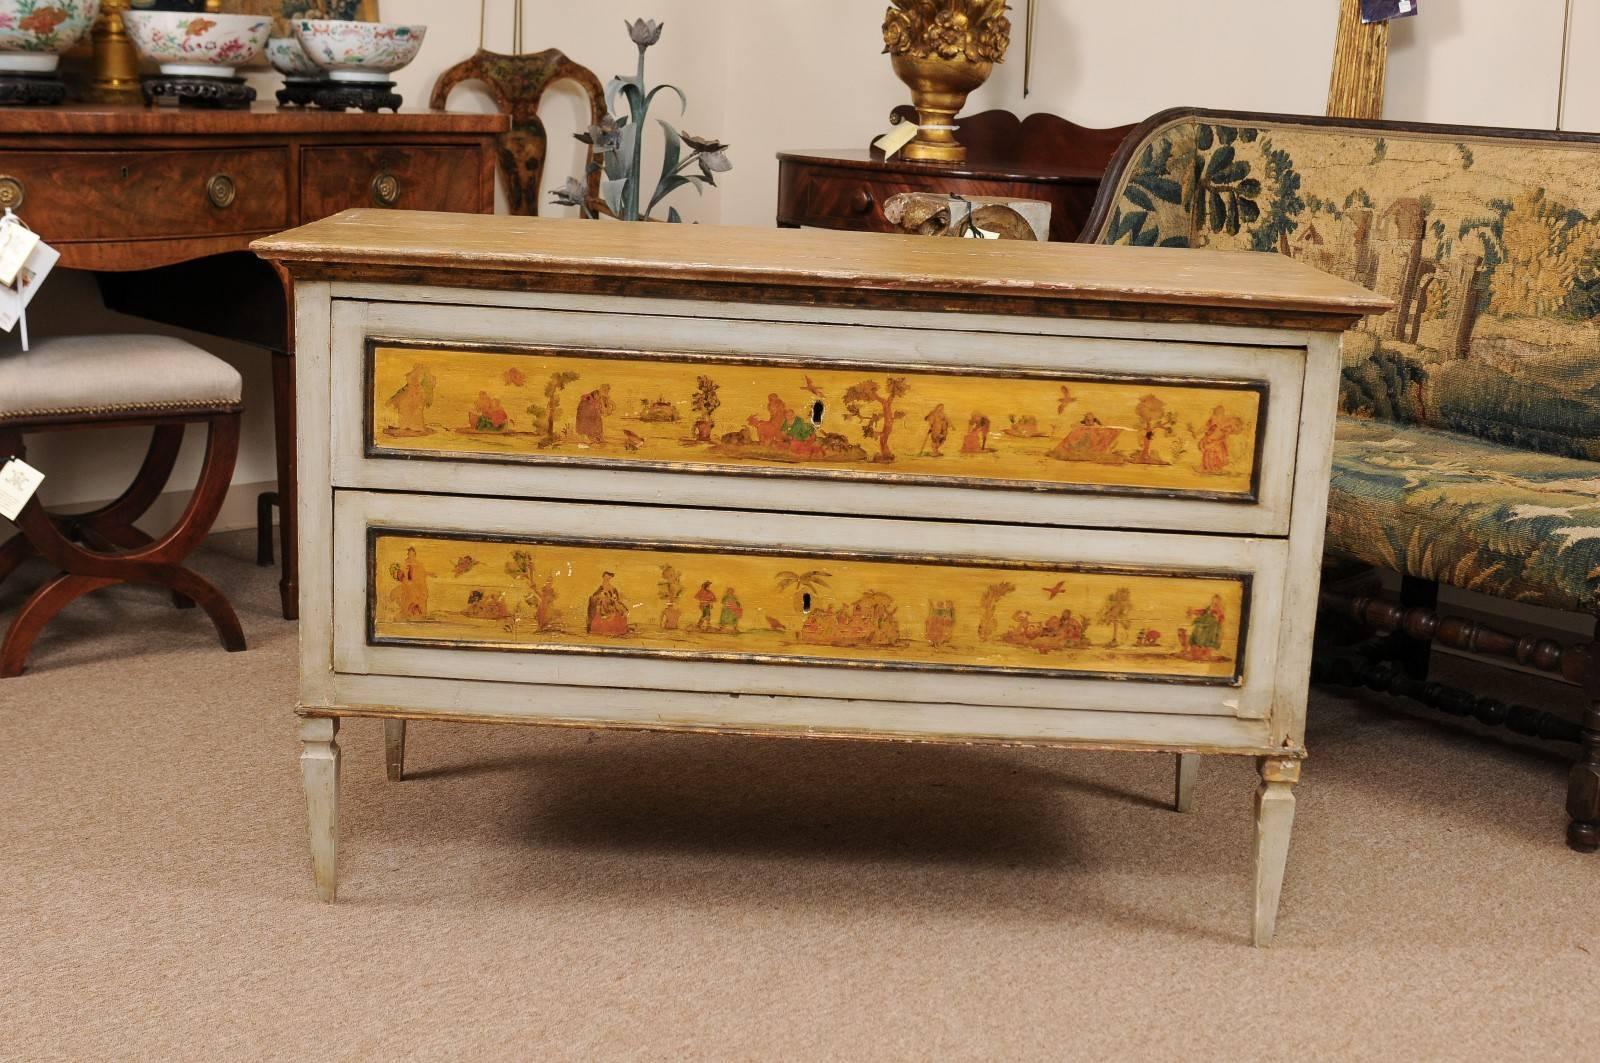 Neoclassical Italian early 19th century two-drawer commode with painted landscape scenes in blue grey and mustard hues, faux marble top and tapered legs. Key used for pulls.